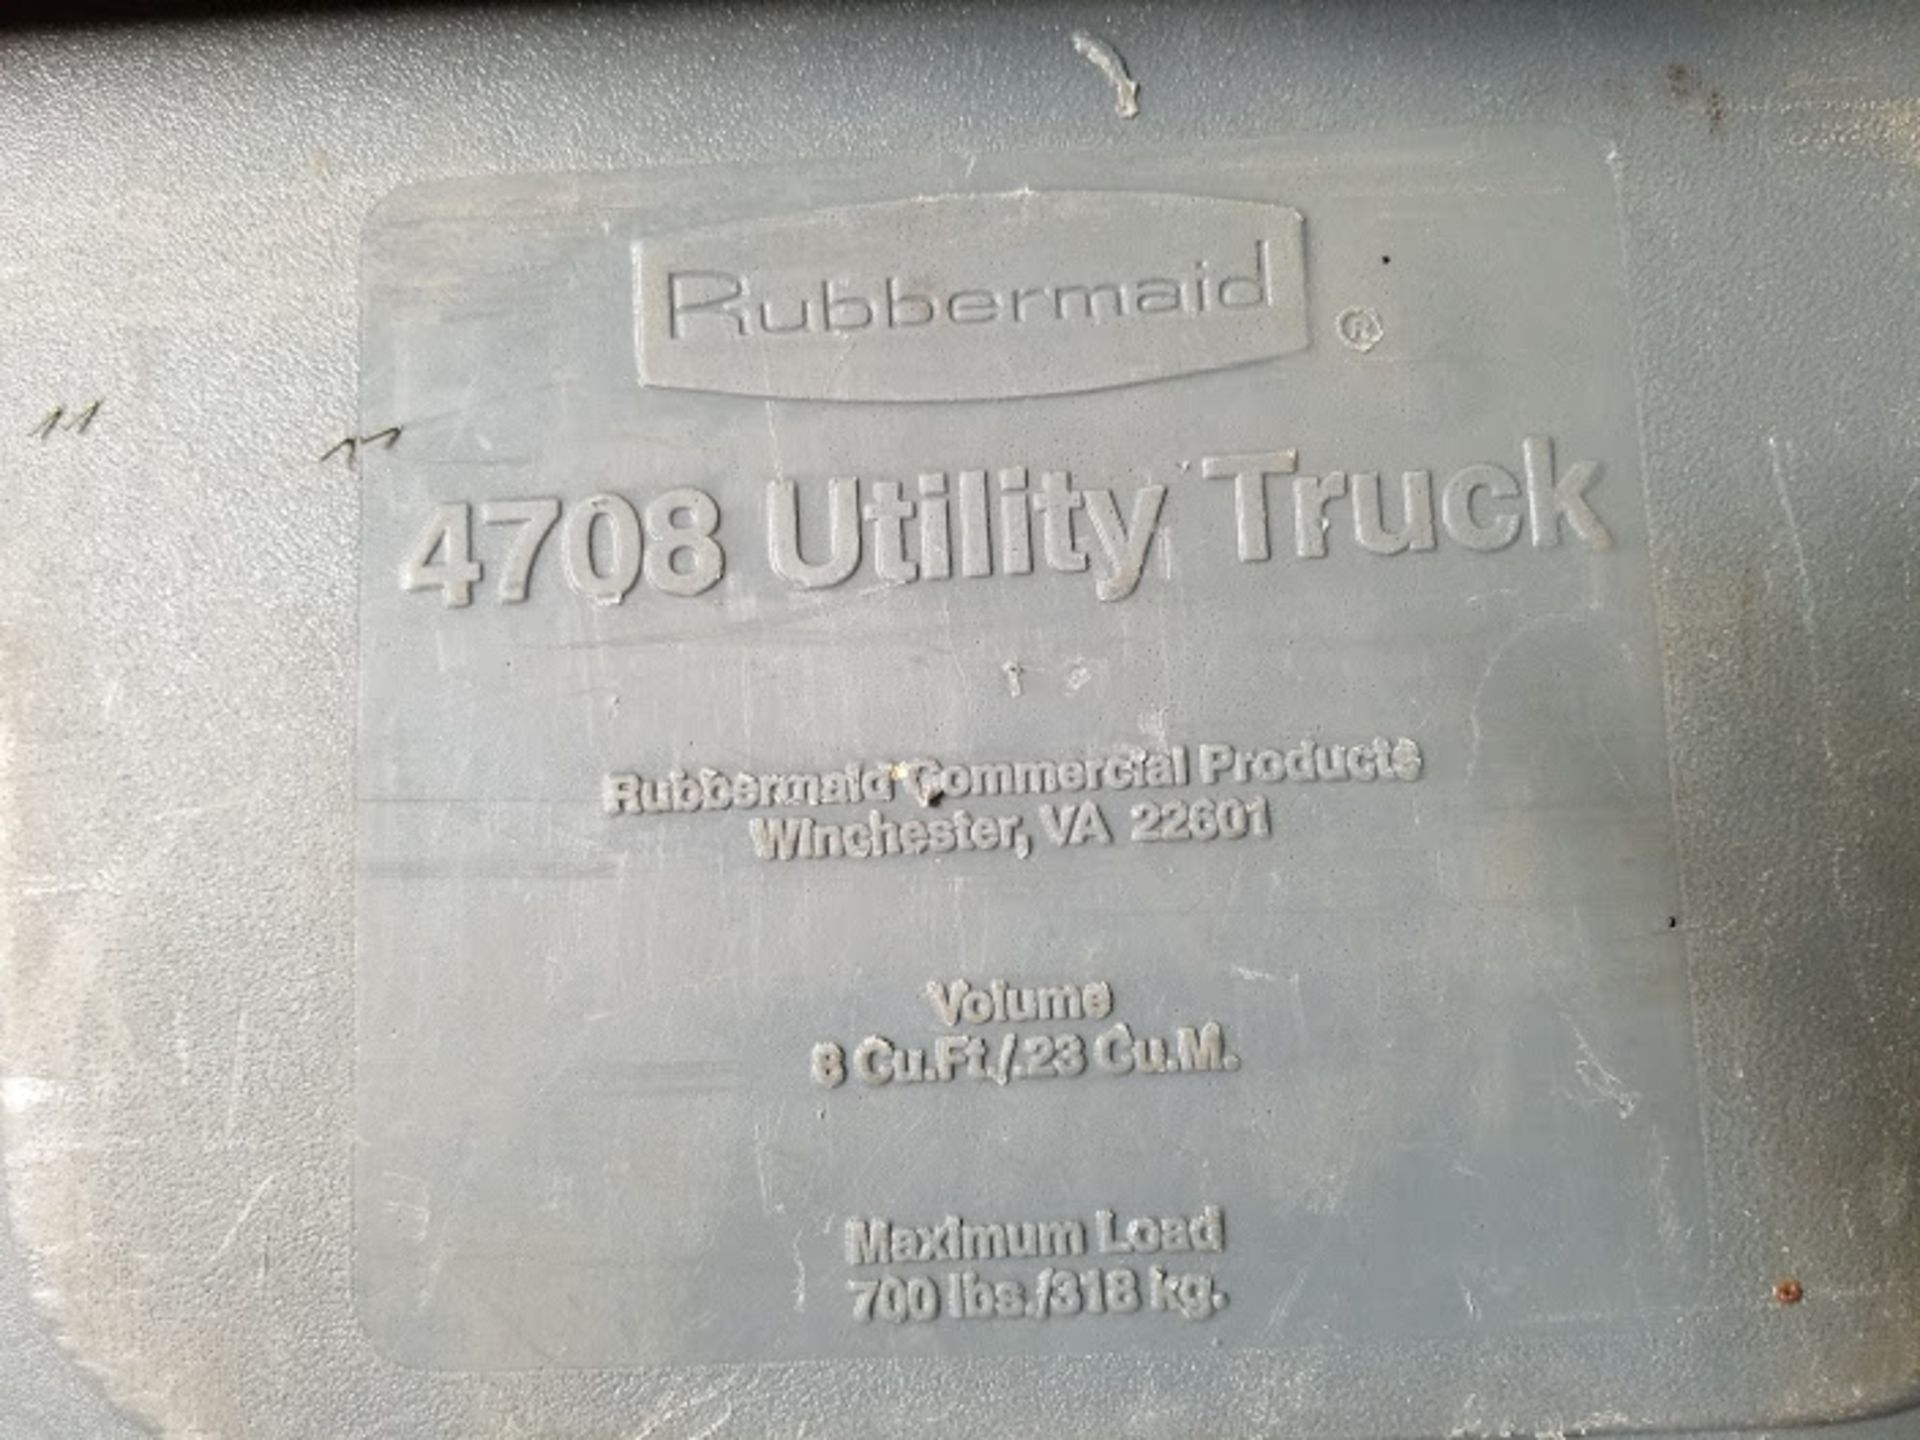 Rubbermaid 4708 Utility Truck (On Wheels) - Image 2 of 3